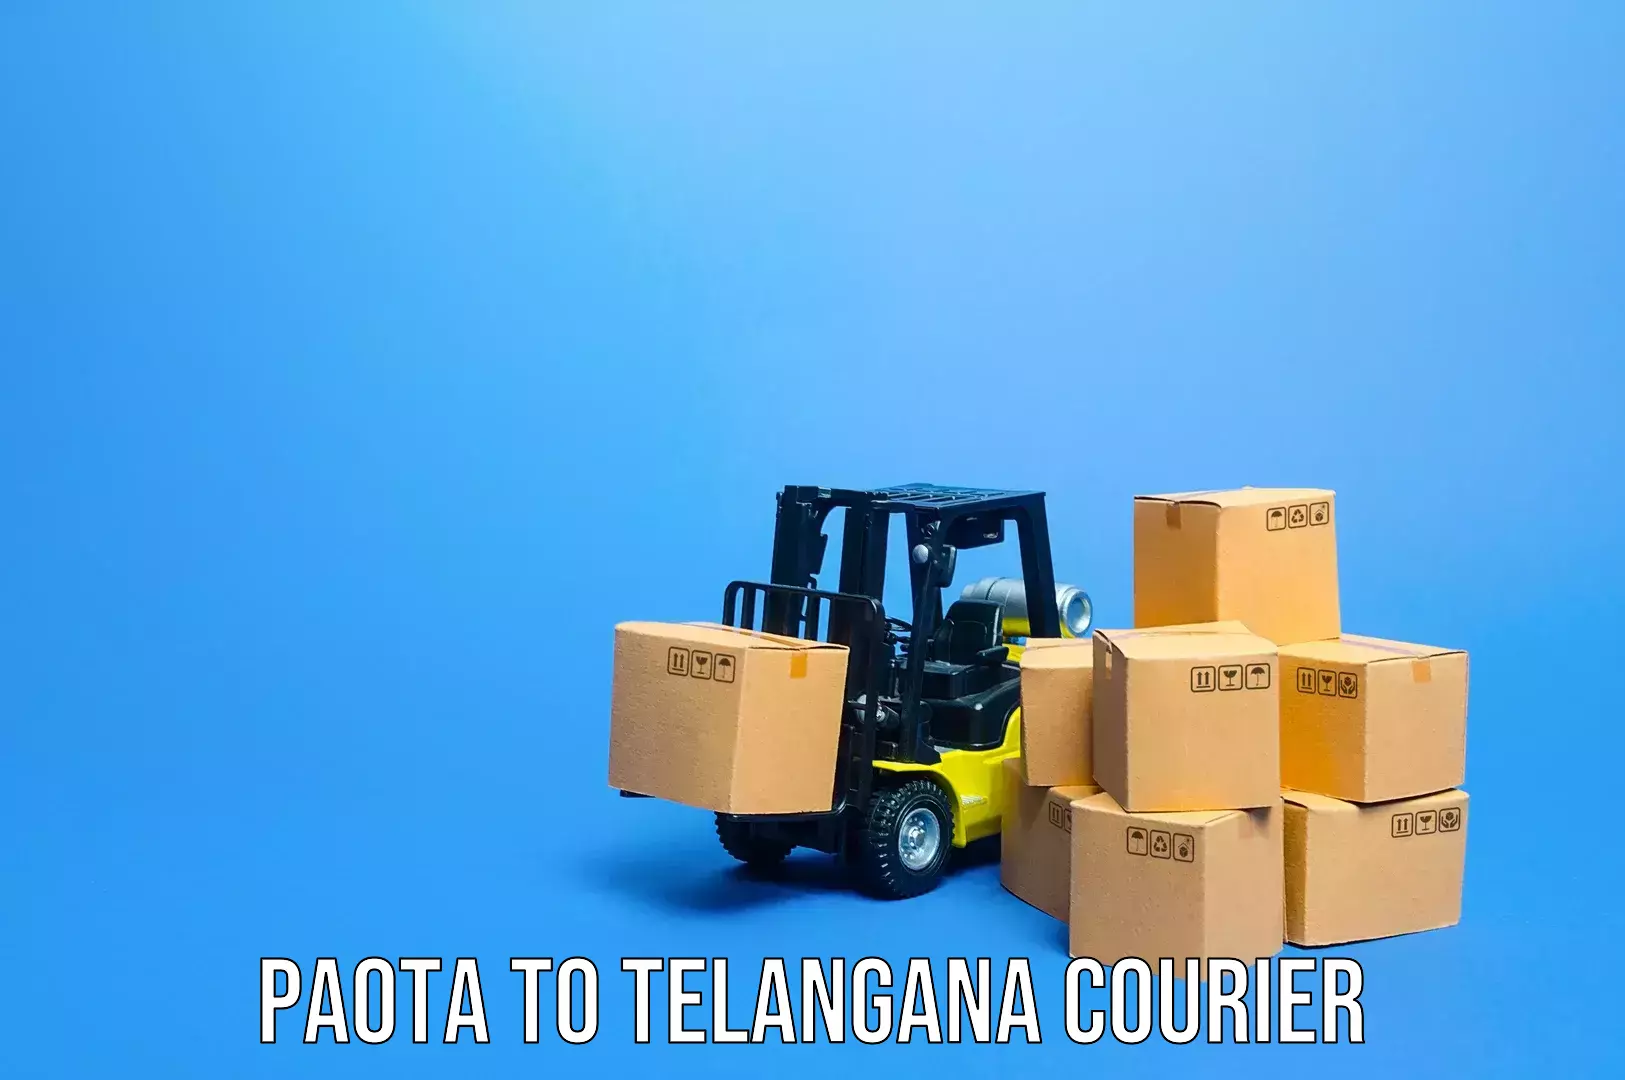 Emergency baggage service Paota to Secunderabad